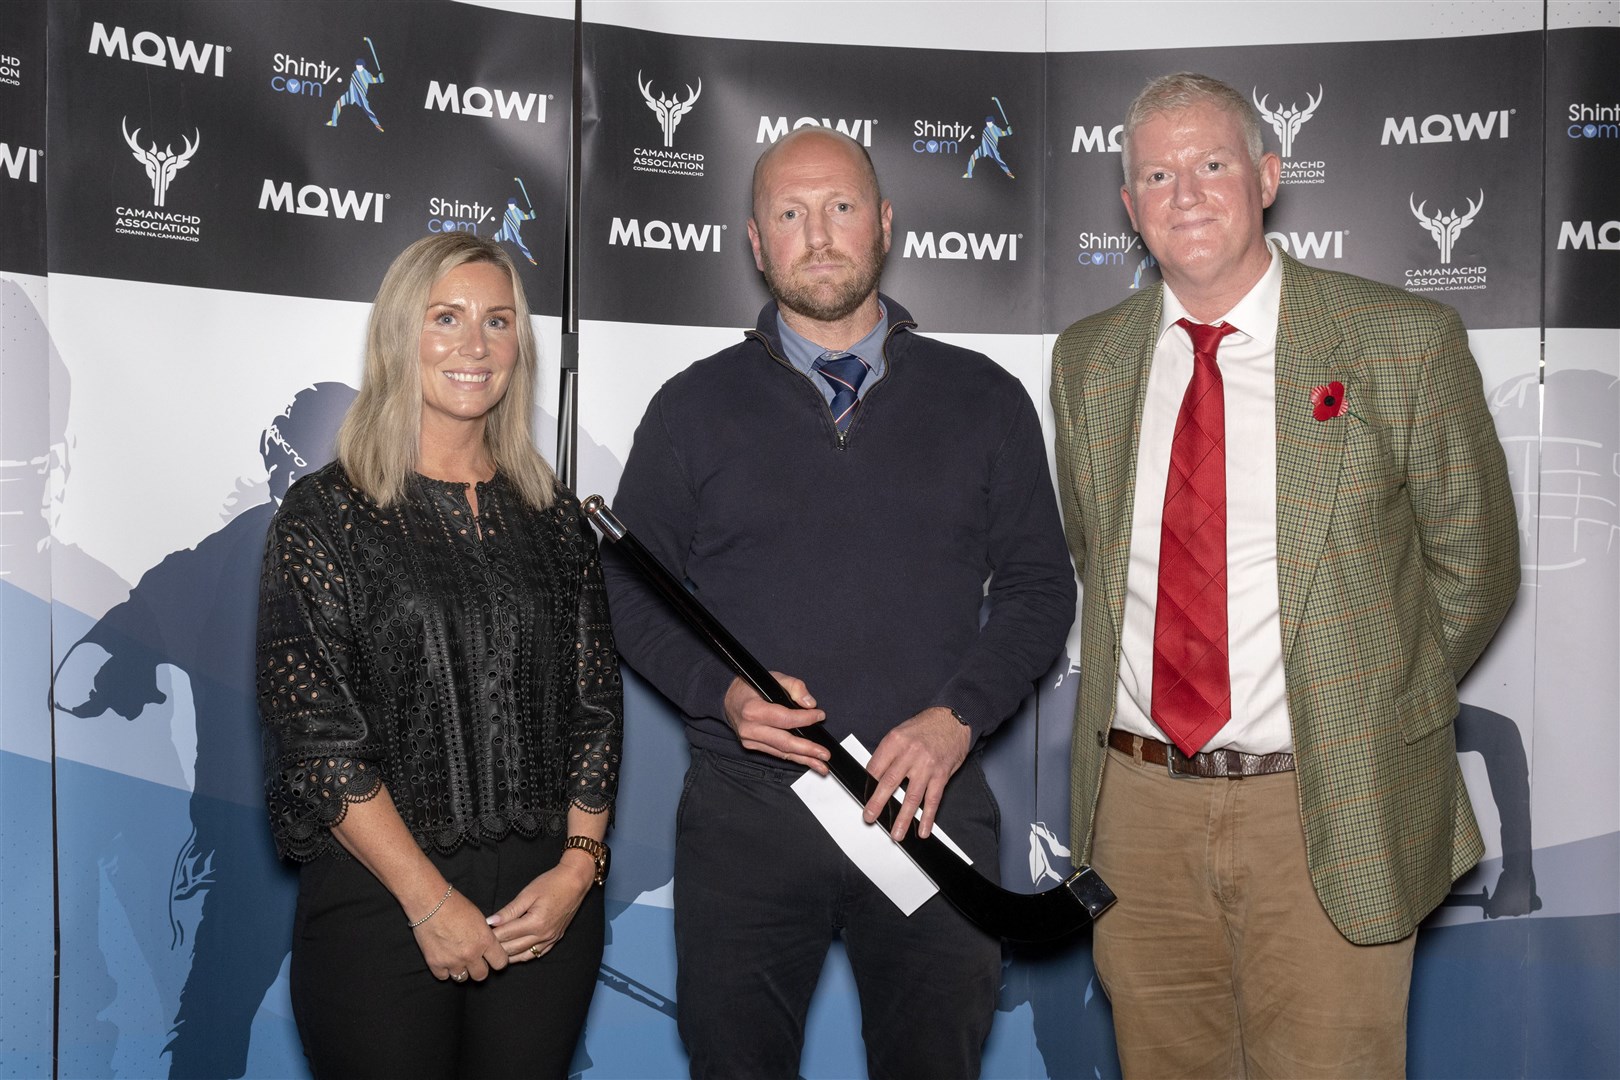 Mowi Coach of the Year (Premiership and National) John Gibson of Kingussie, presented with the award by Mowi's Jayne Mackay (left) and Dougie Hunter at last year's ceremony.